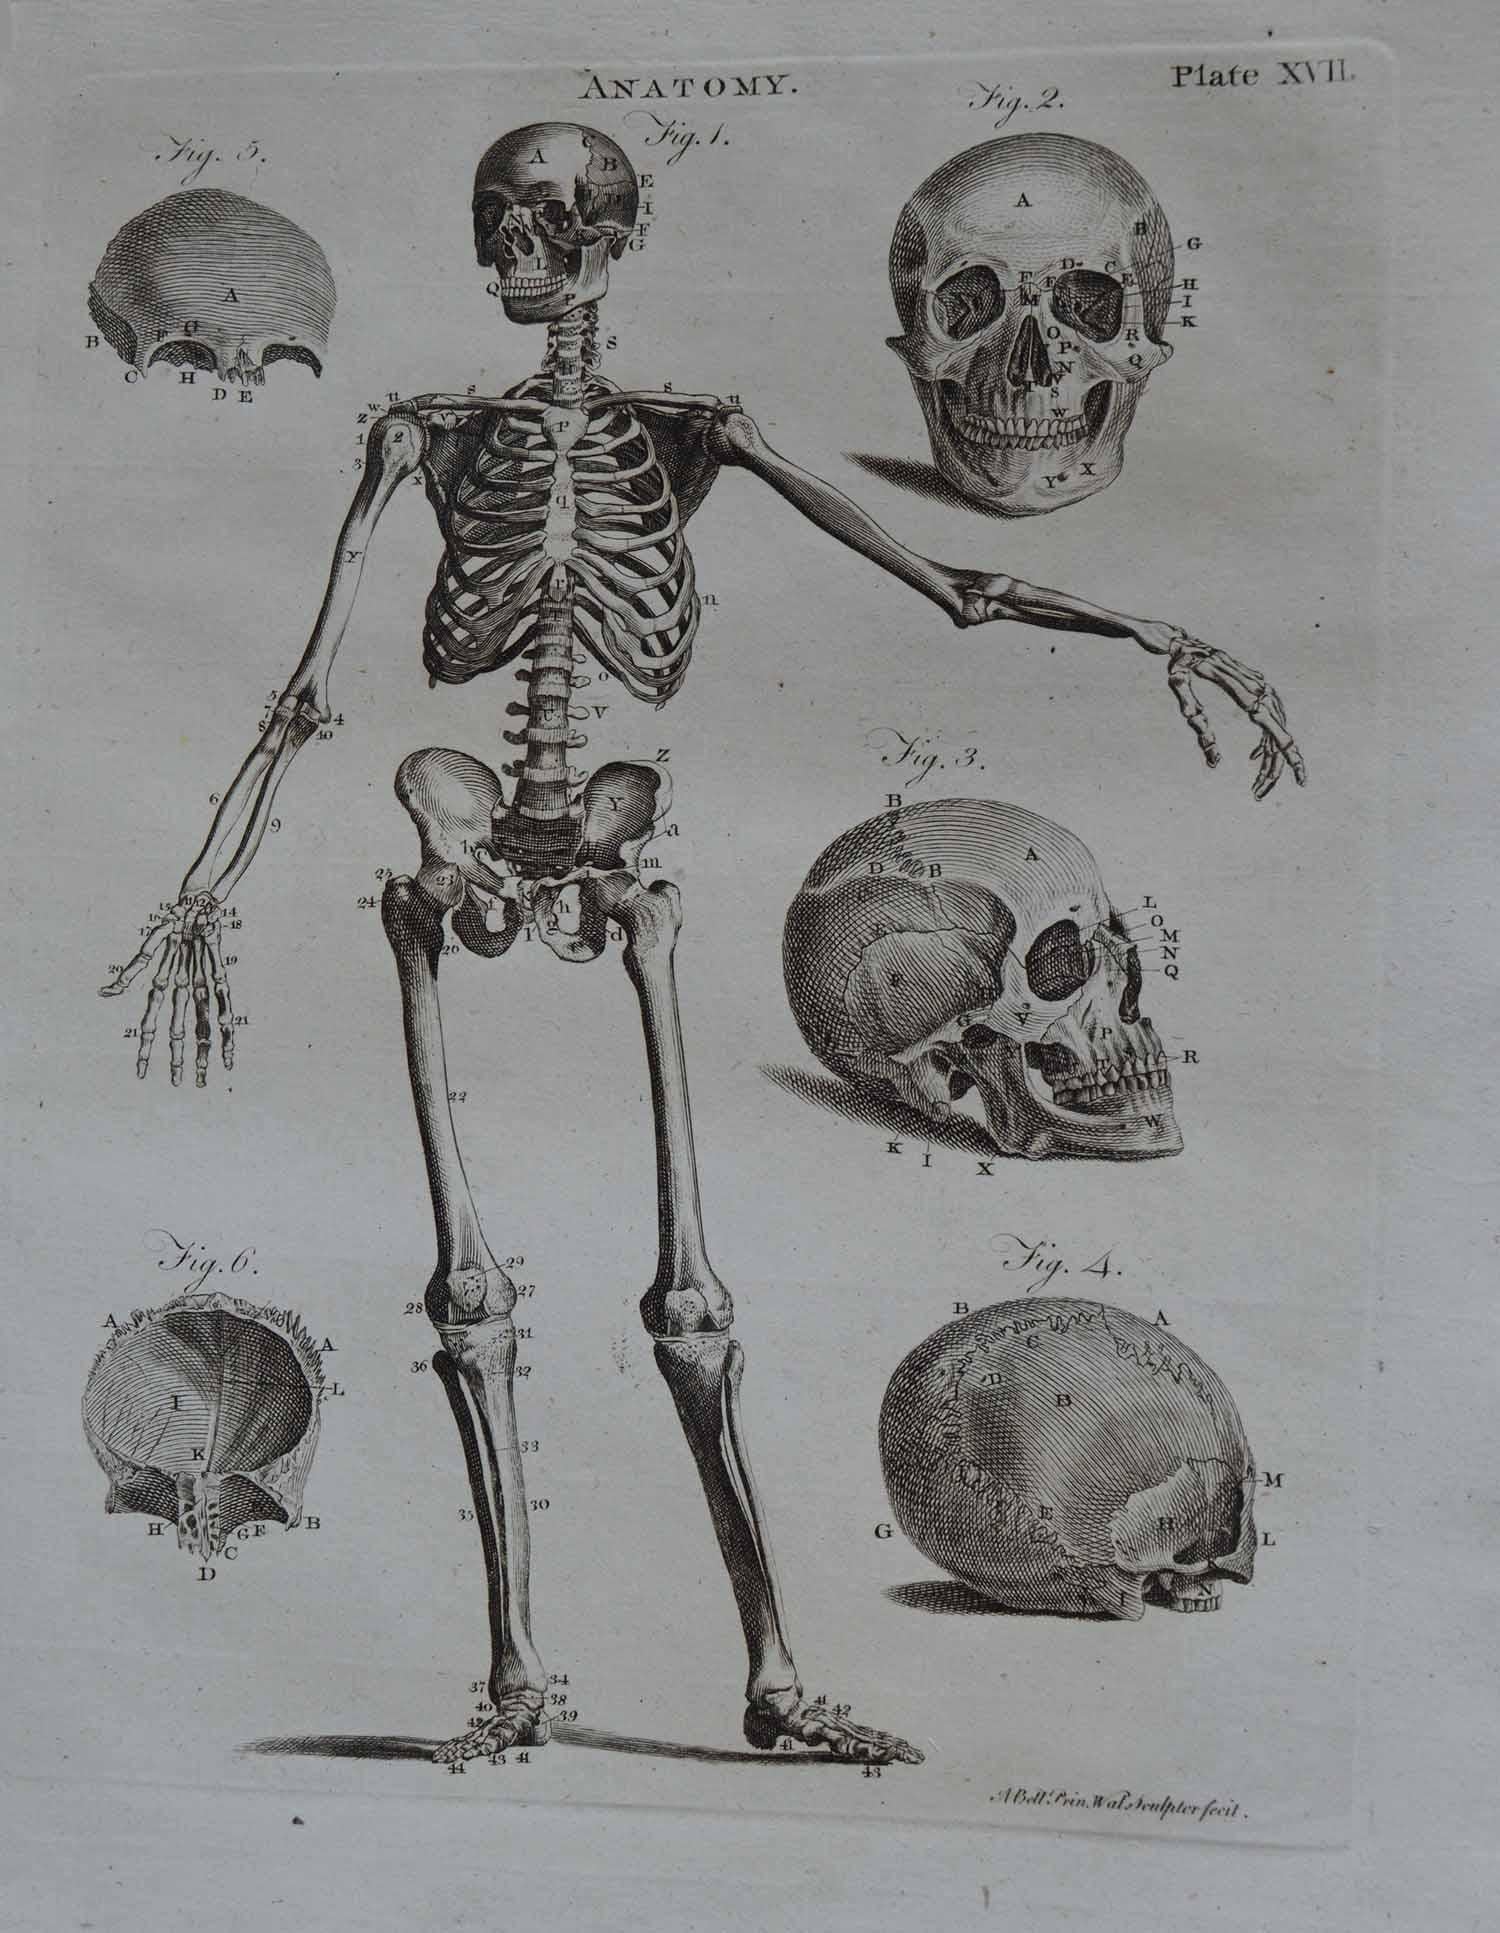 English Set of 9 Anatomical Prints by A. Bell, 18th Century